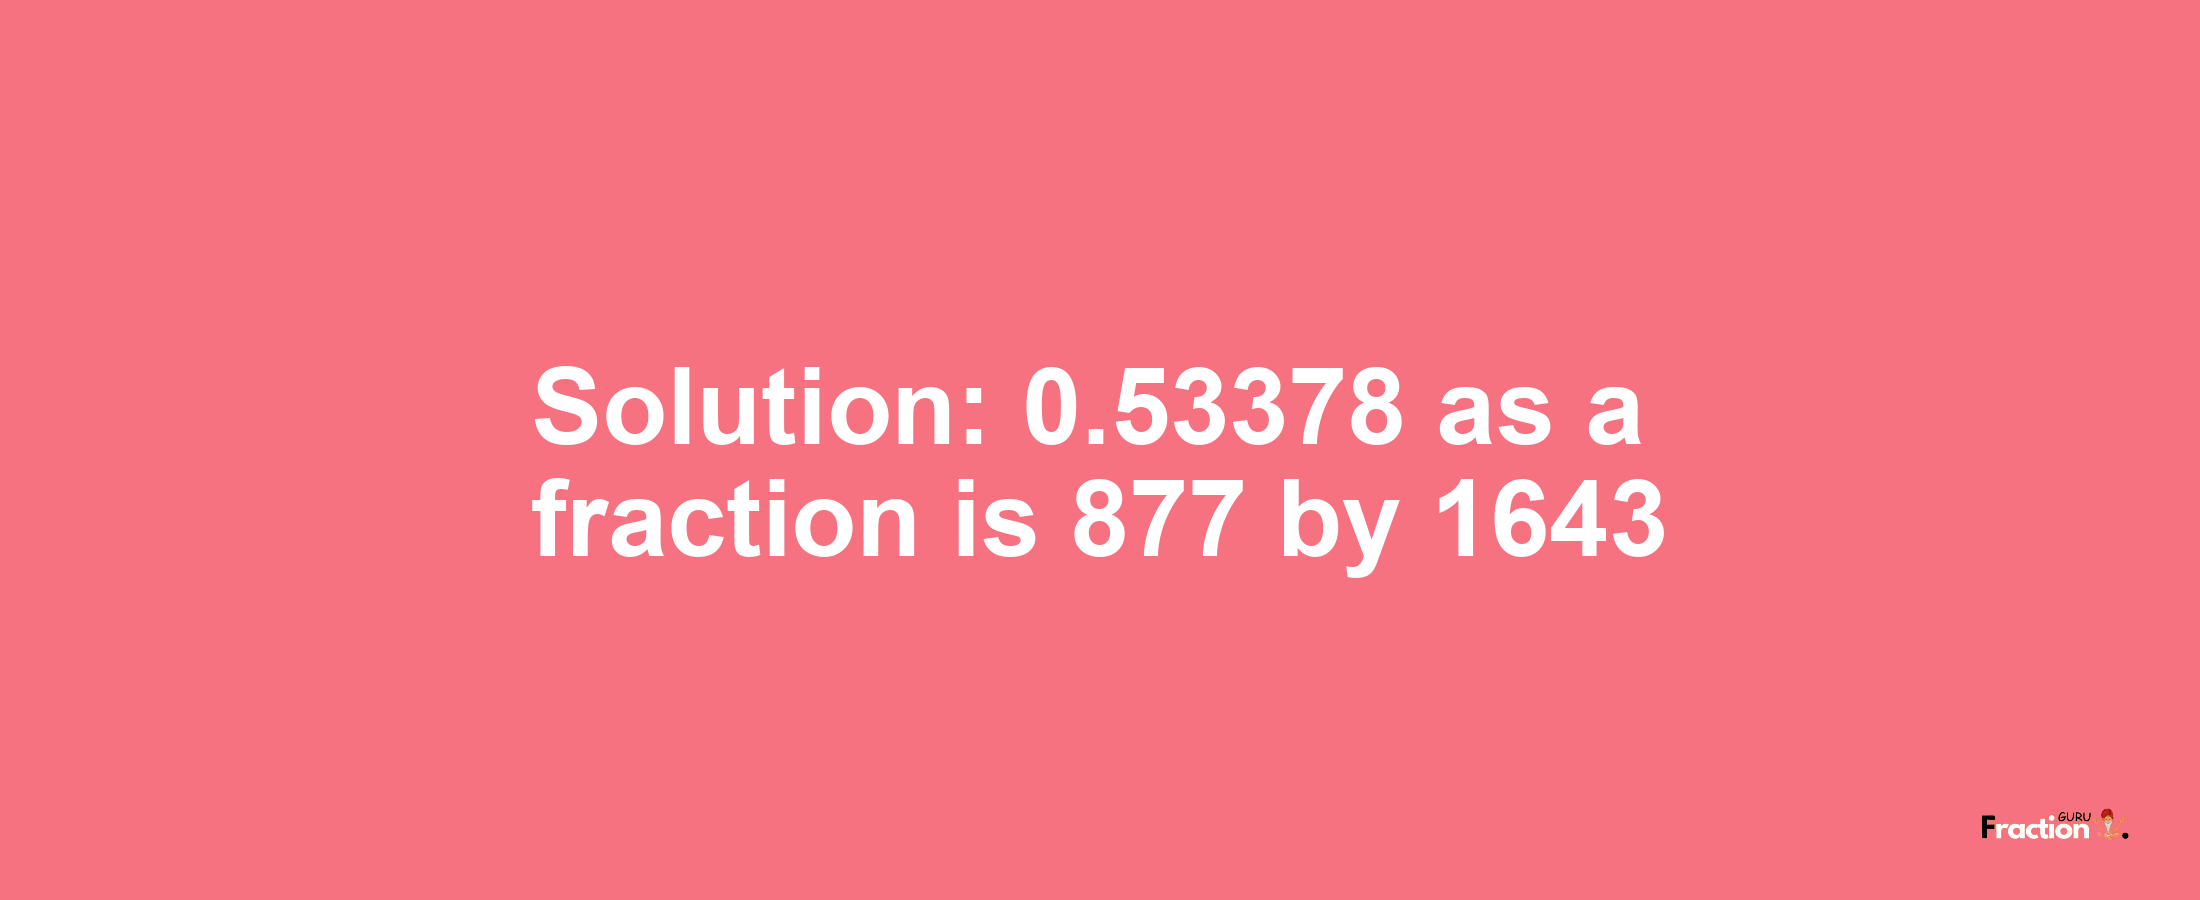 Solution:0.53378 as a fraction is 877/1643